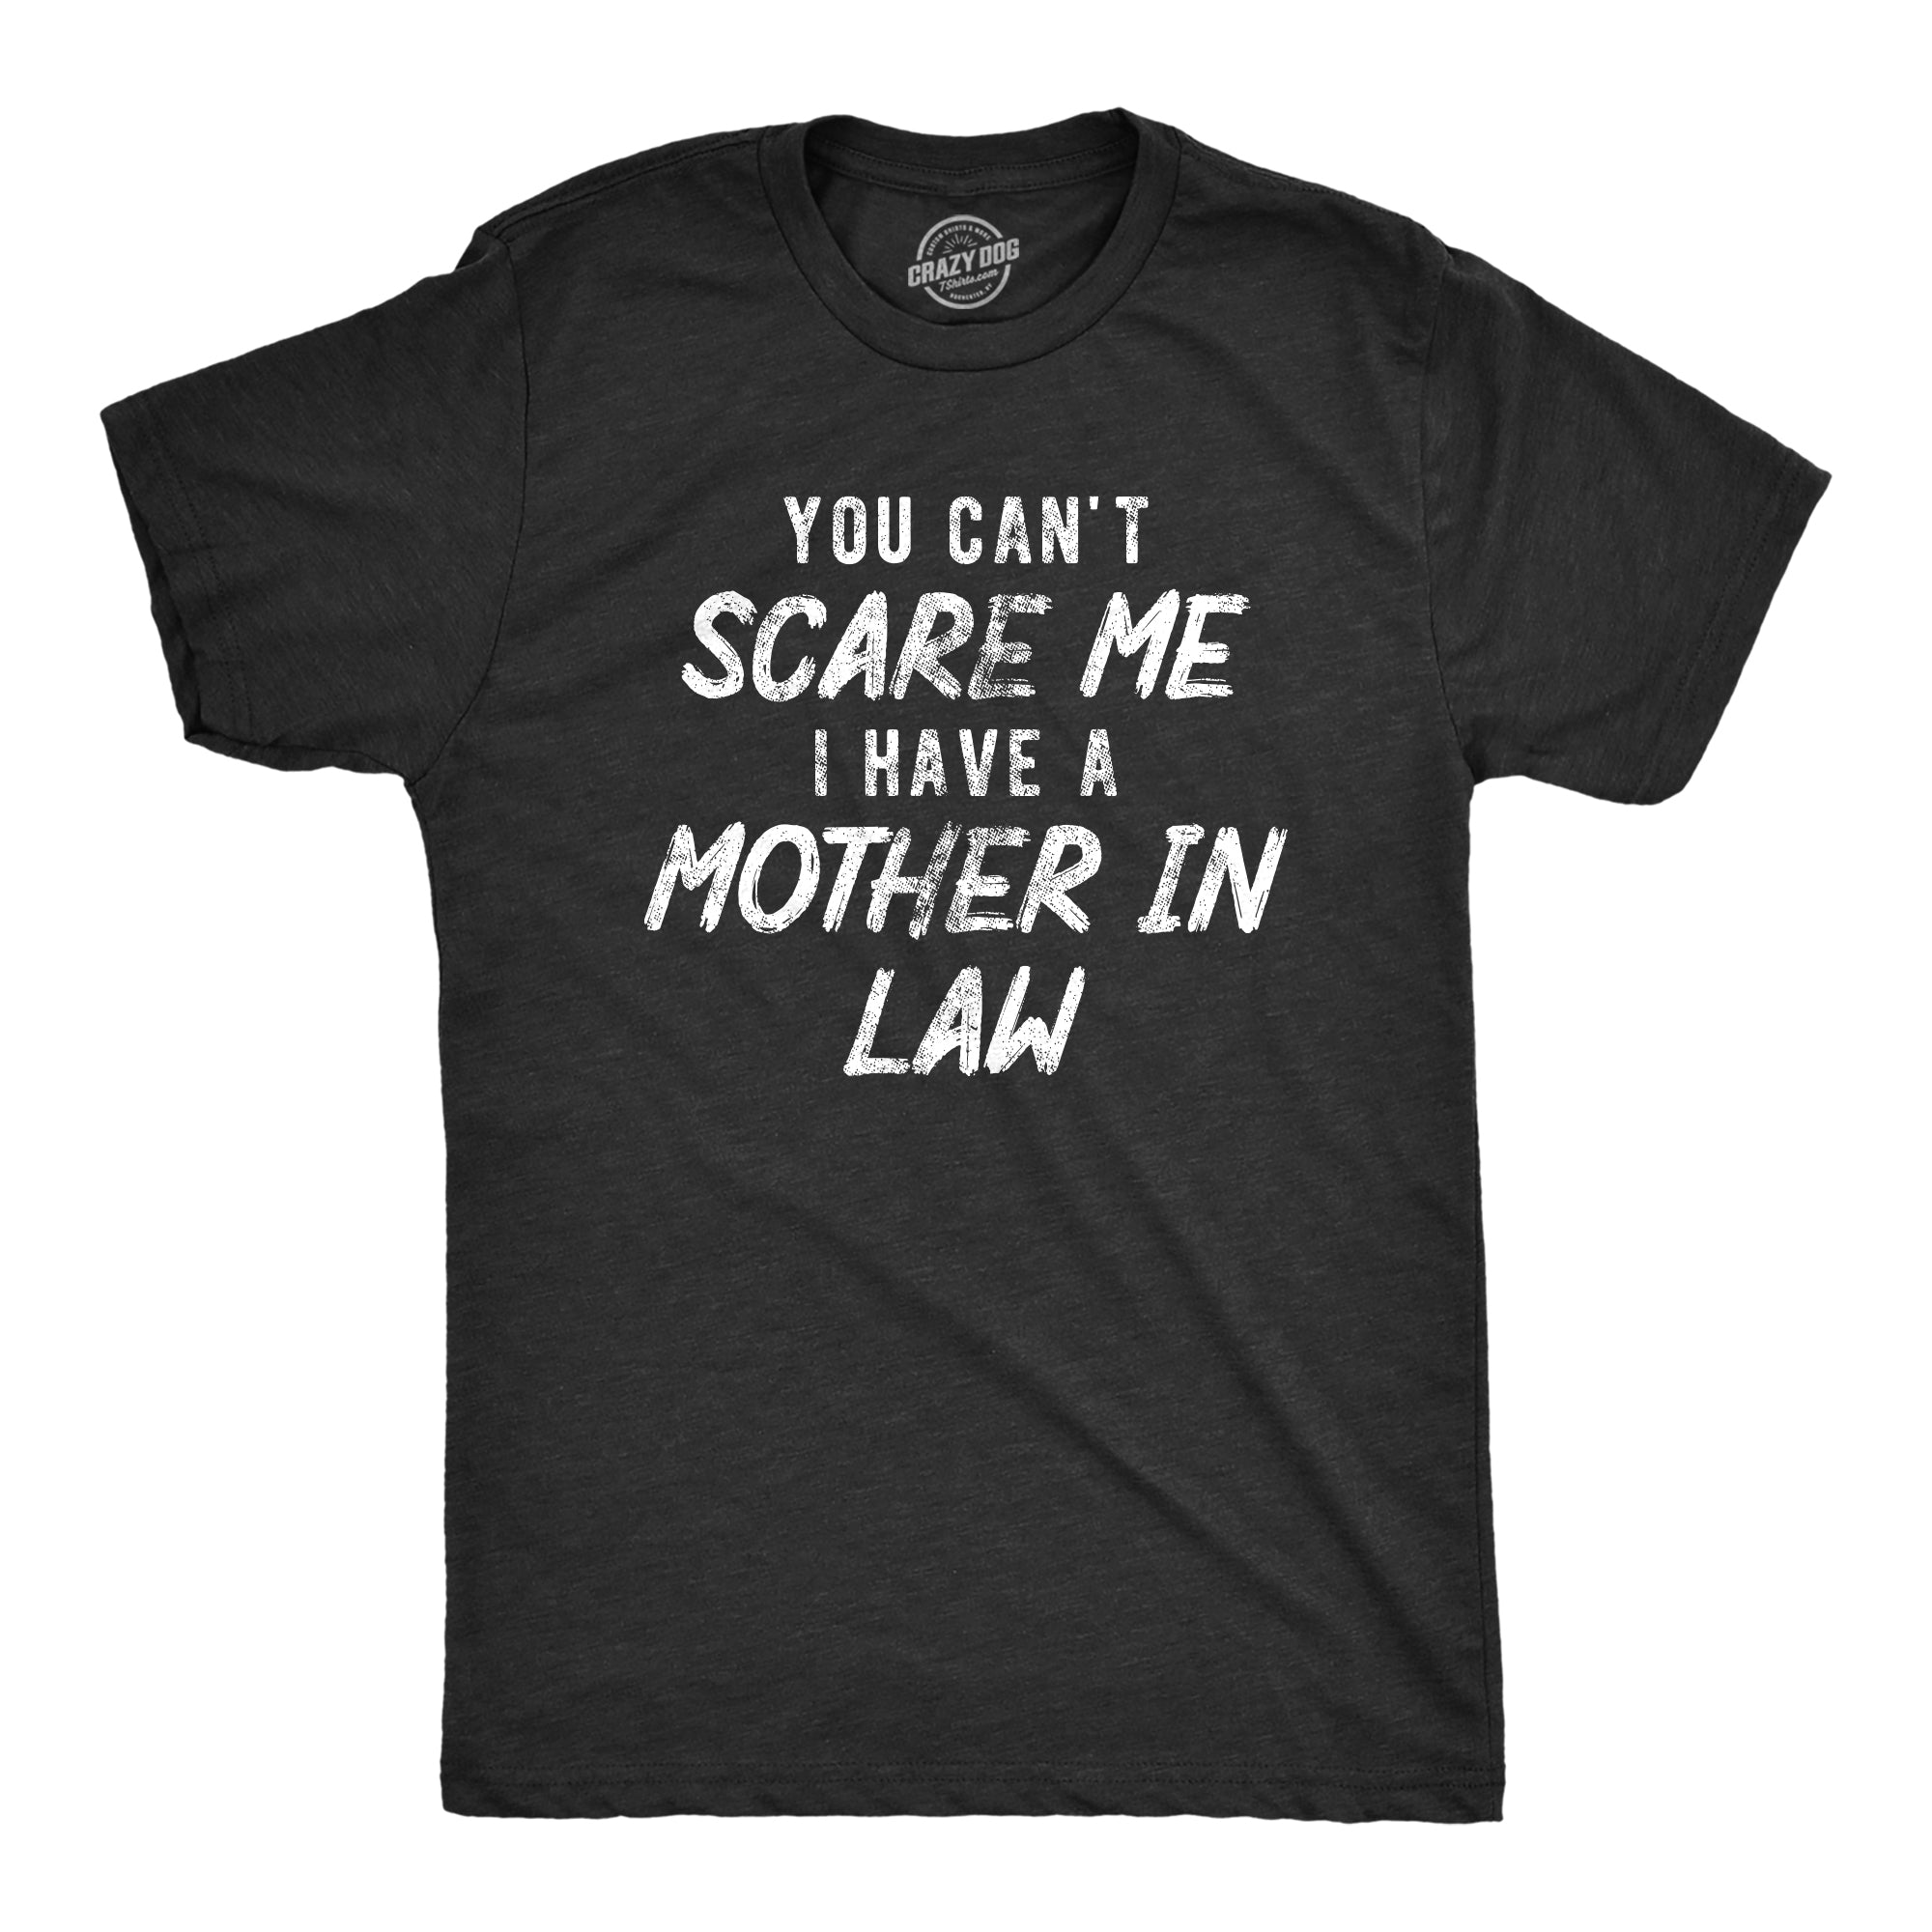 Funny Heather Black - INLAW You Cant Scare Me I Have A Mother In Law Mens T Shirt Nerdy Sarcastic Tee